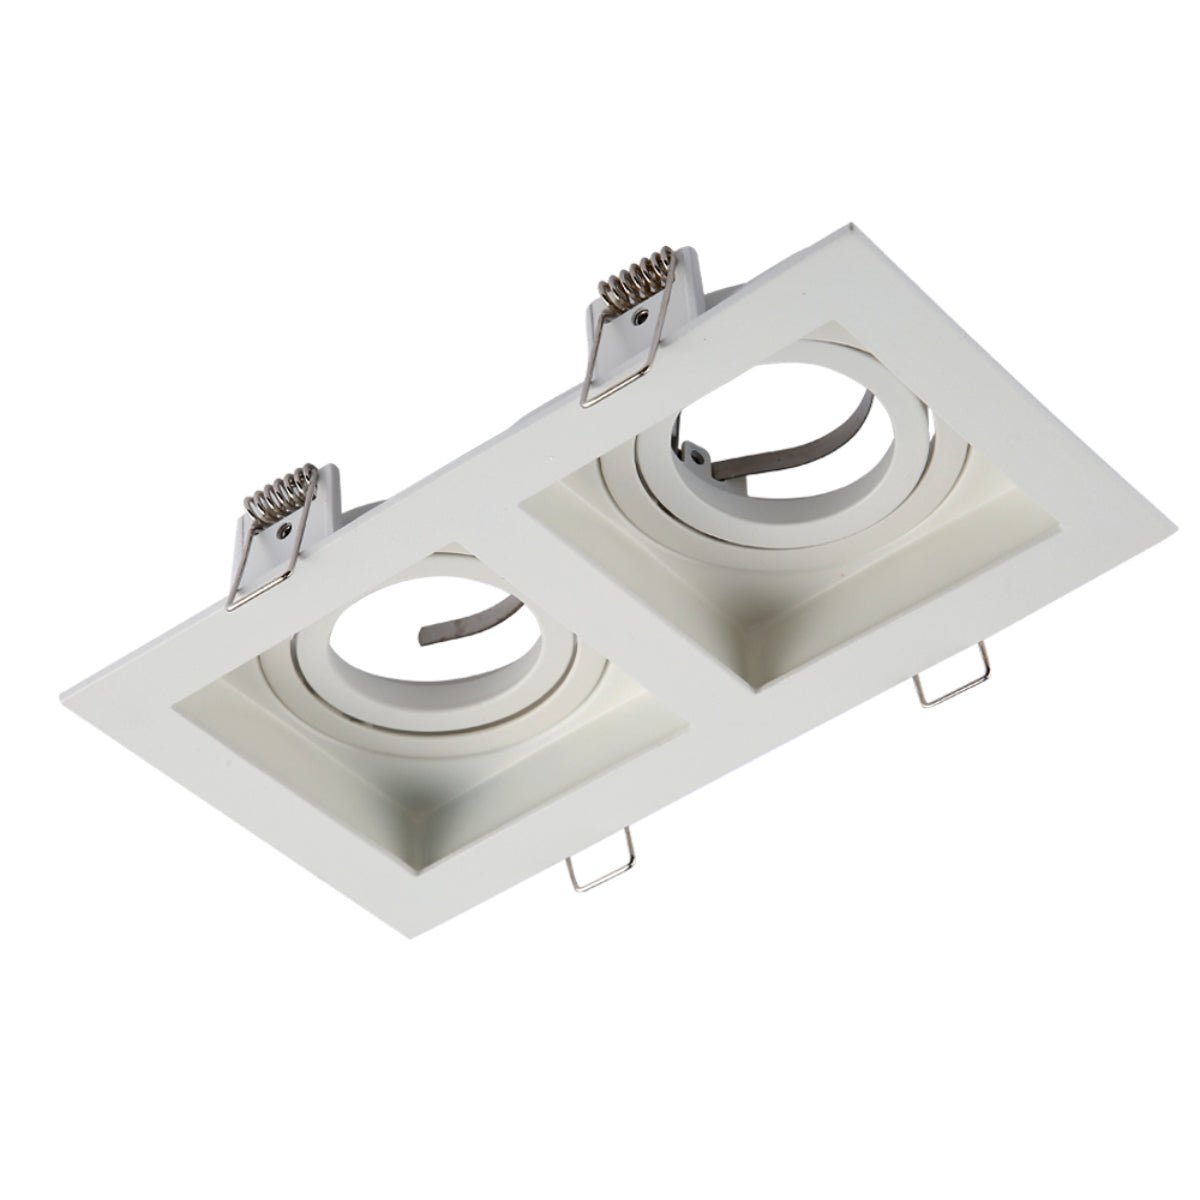 Main image of Grille Recessed Tilt Downlight White with 2xGU10 Fitting | TEKLED 165-03874